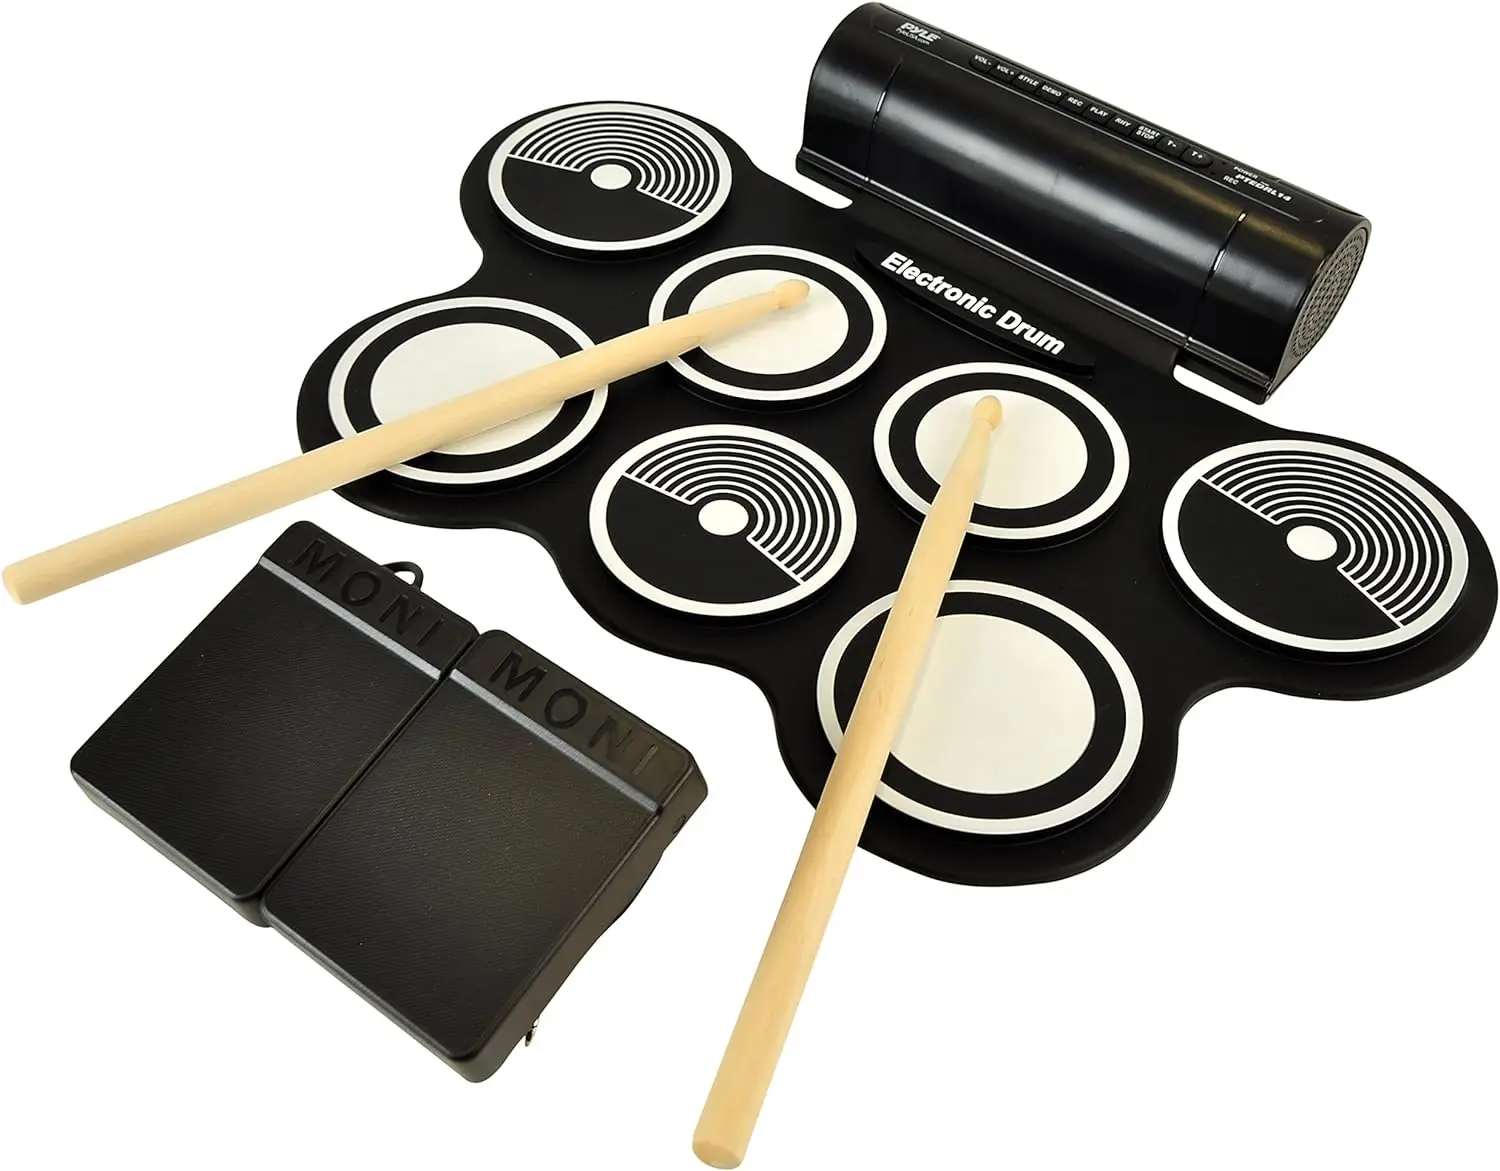 

Electronic Roll Up MIDI Drum Kit W/ 9 Electric Drum Pads, Foot Pedals, Drumsticks, & Power Supply | Quick Setup | Tabletop R